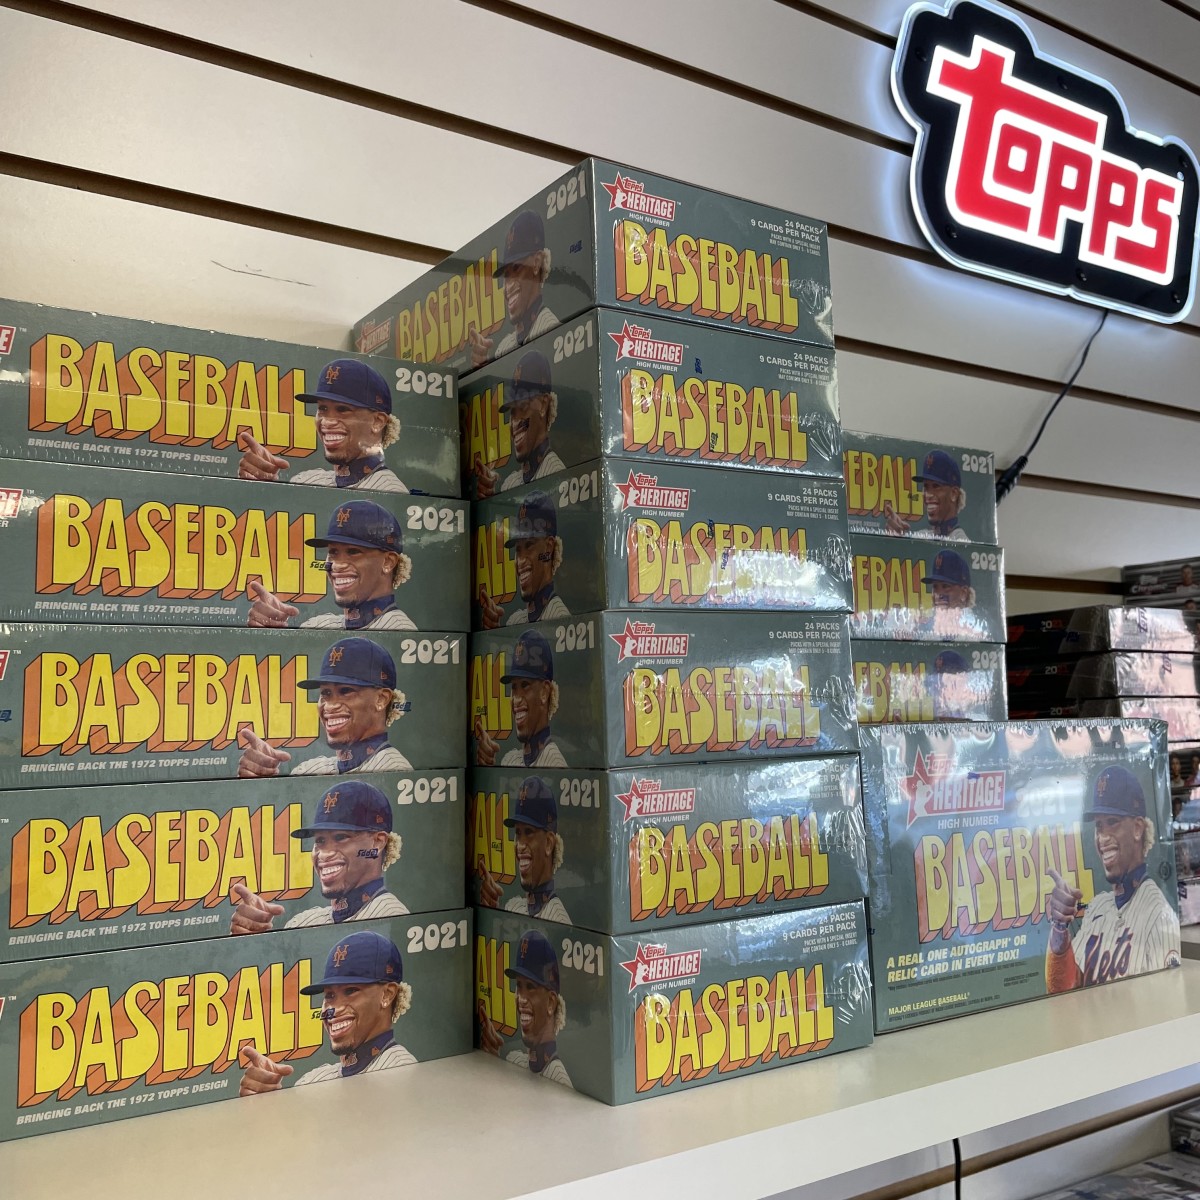 The Topps Dave & Adam's card shop in Cooperstown, N.Y.